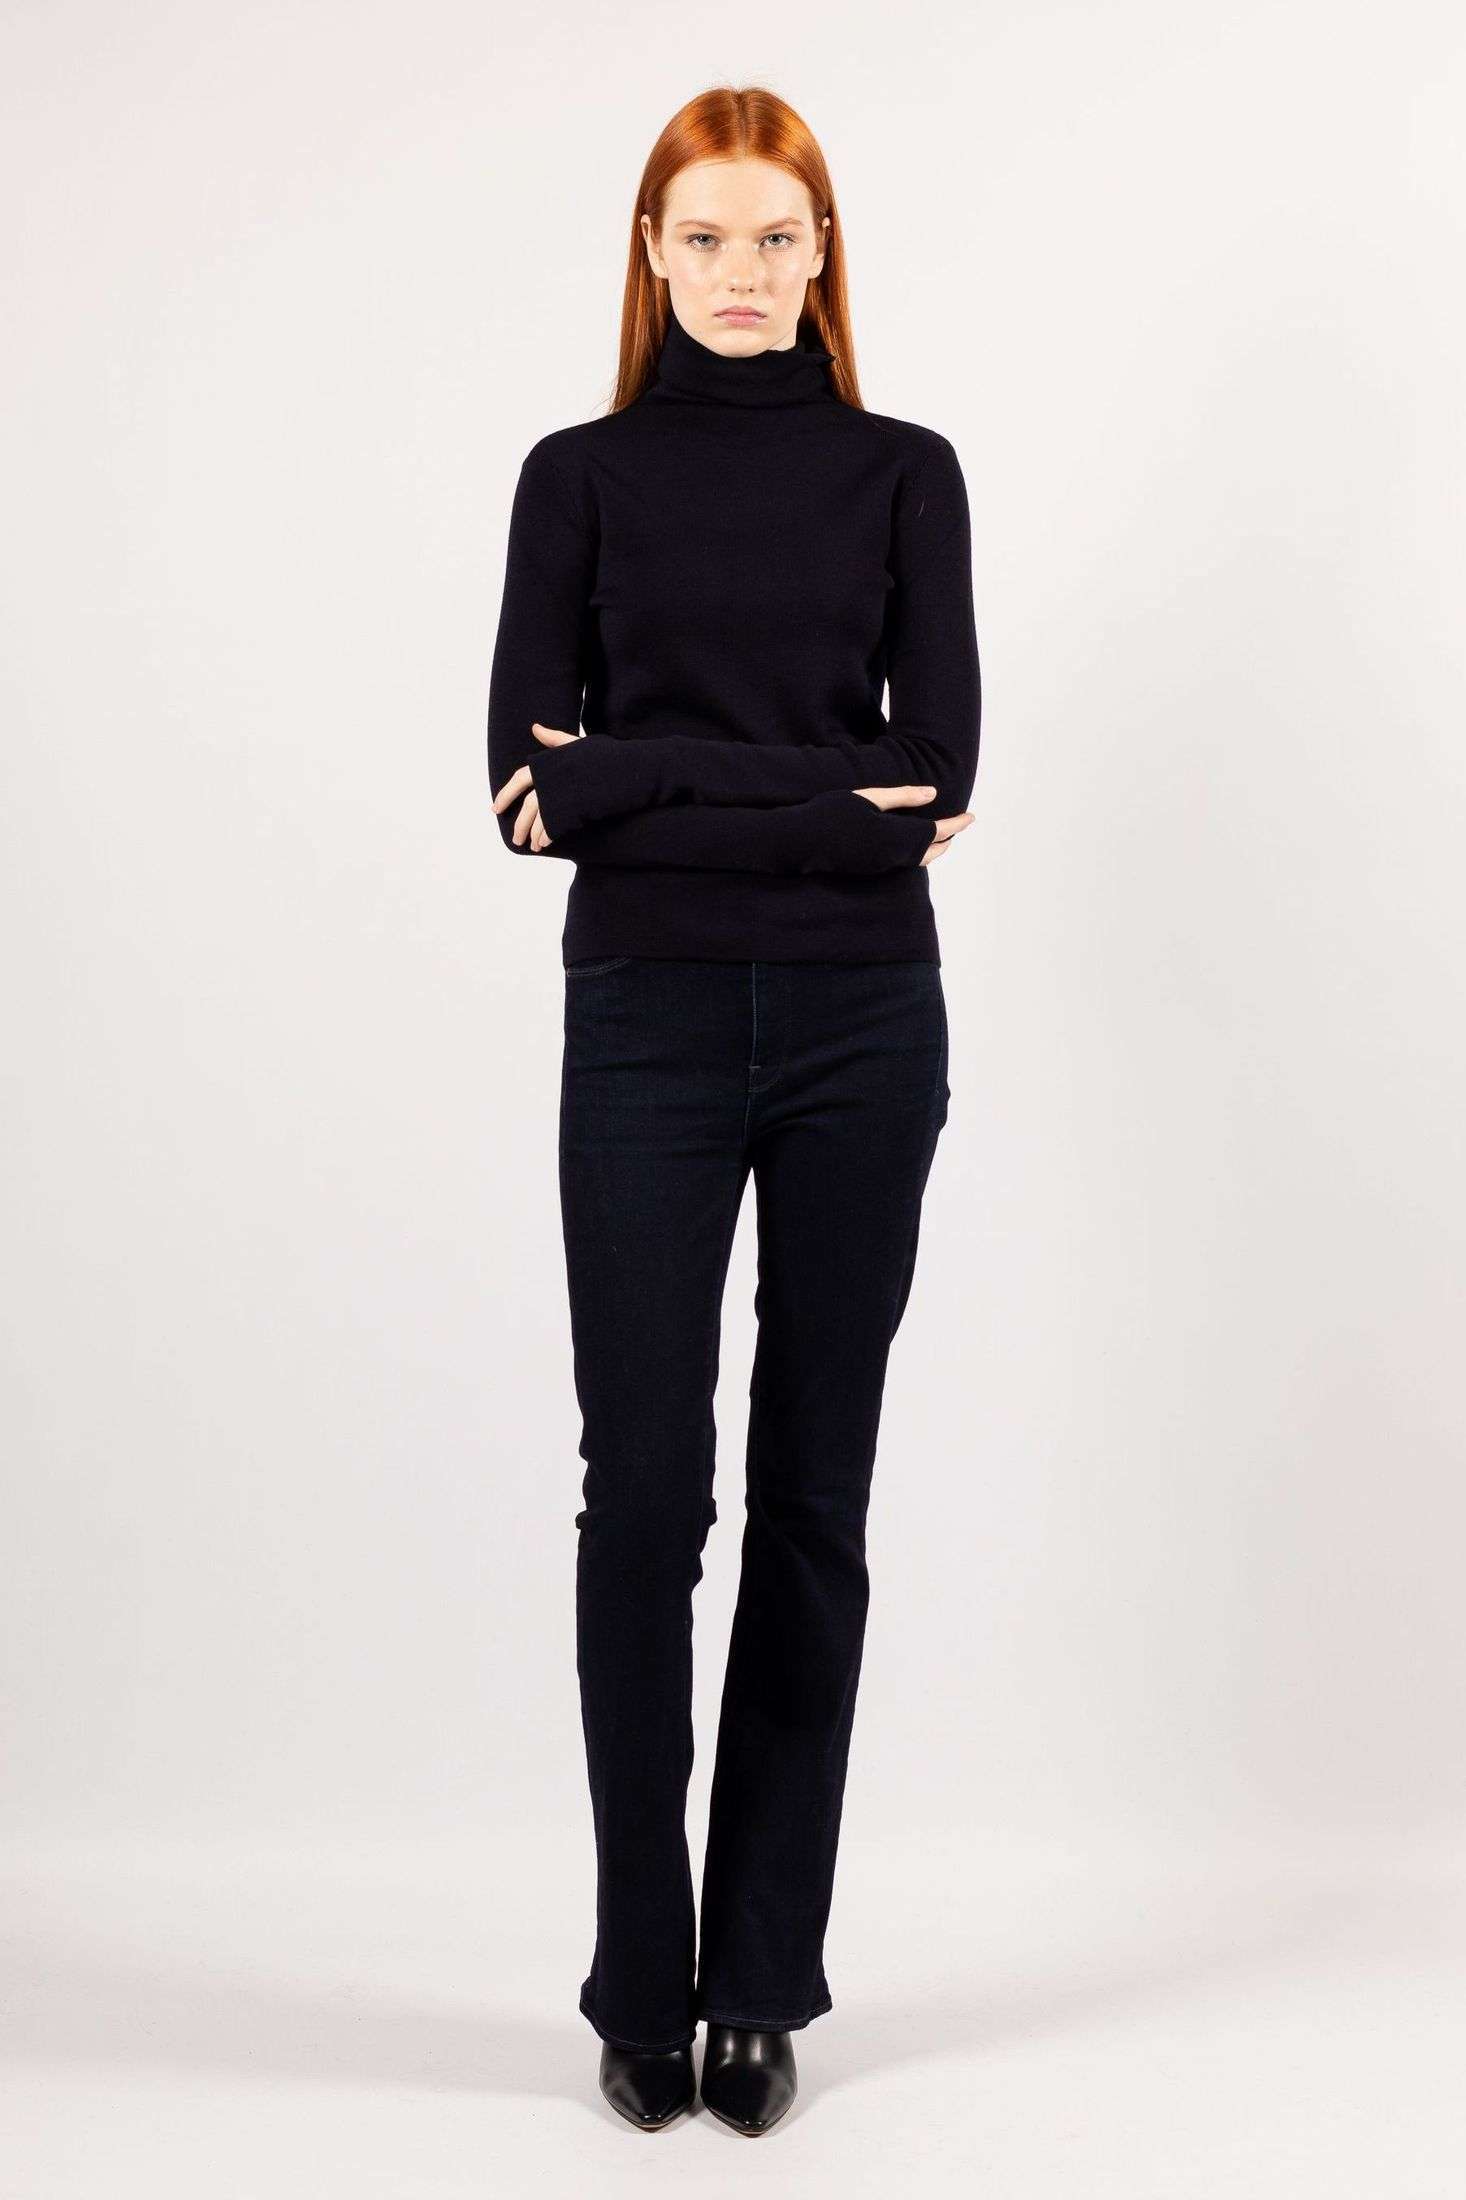 Revel in the style statement made by a young woman in the navy ADA fine knit turtleneck.